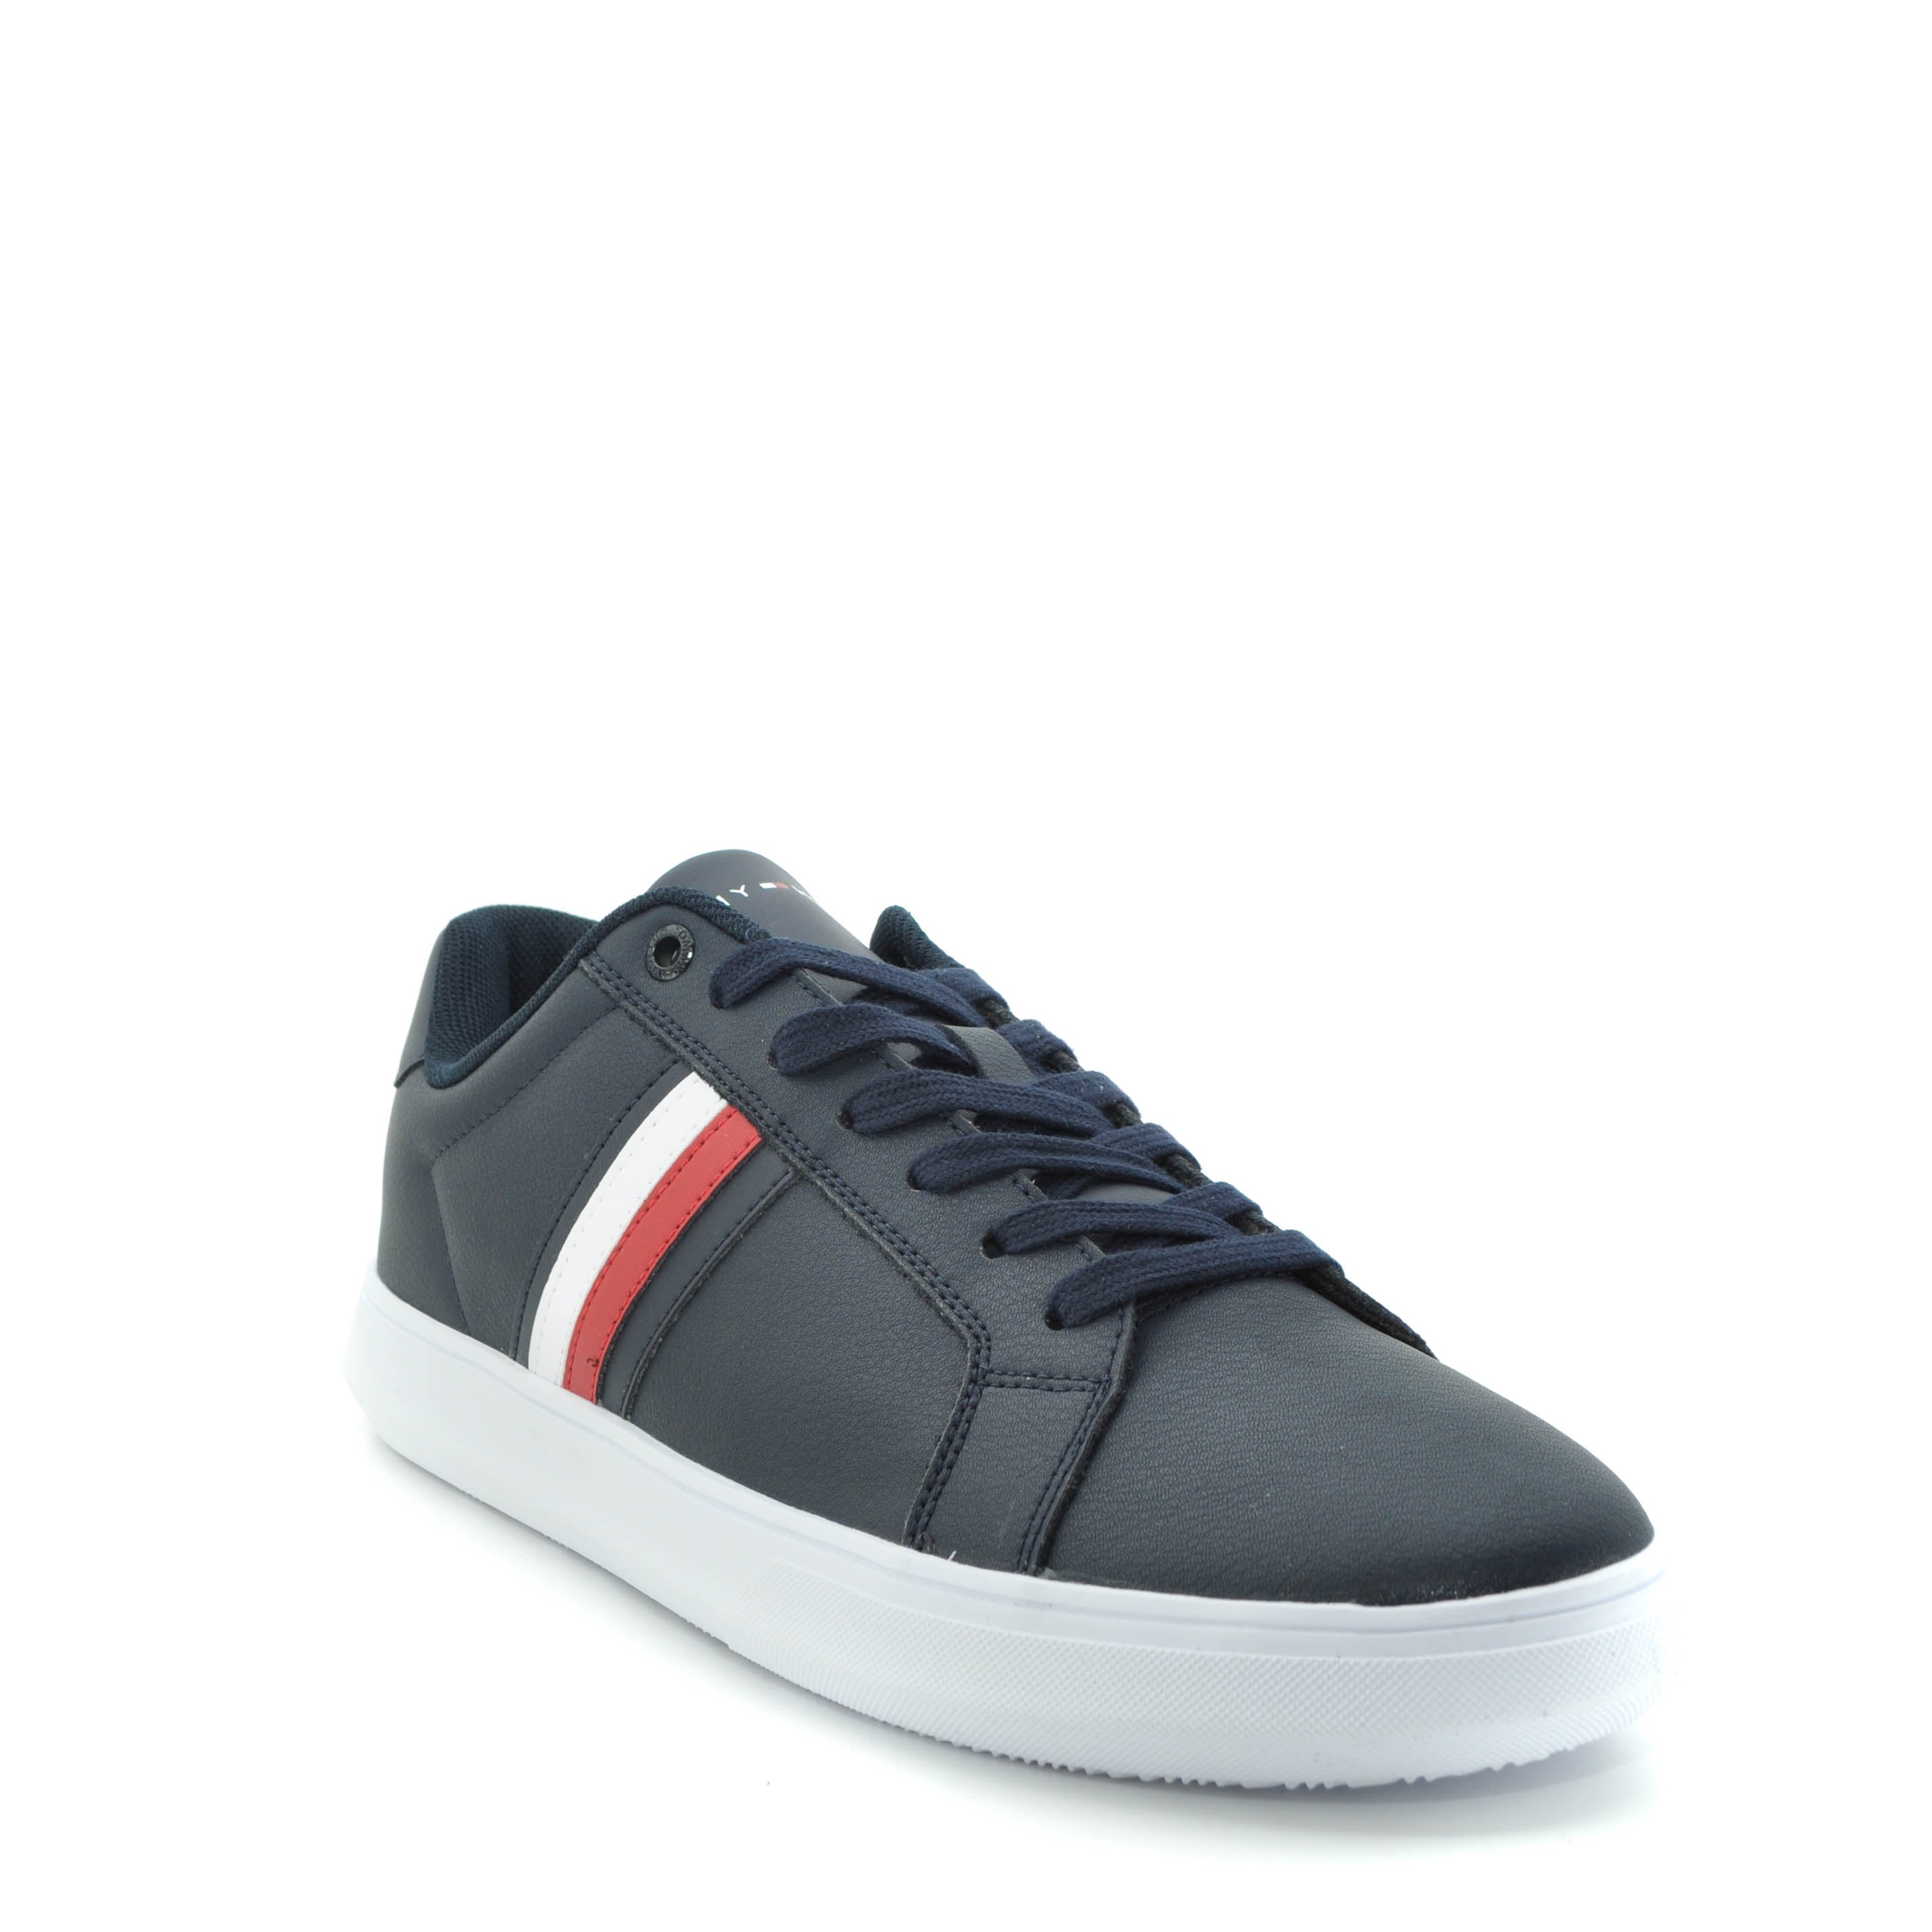 Buy Tommy Hilfiger Men Chunky Dress Loafer Black Leather 7 UK (41 EU) (8  US) (P0AMF10941) at Amazon.in